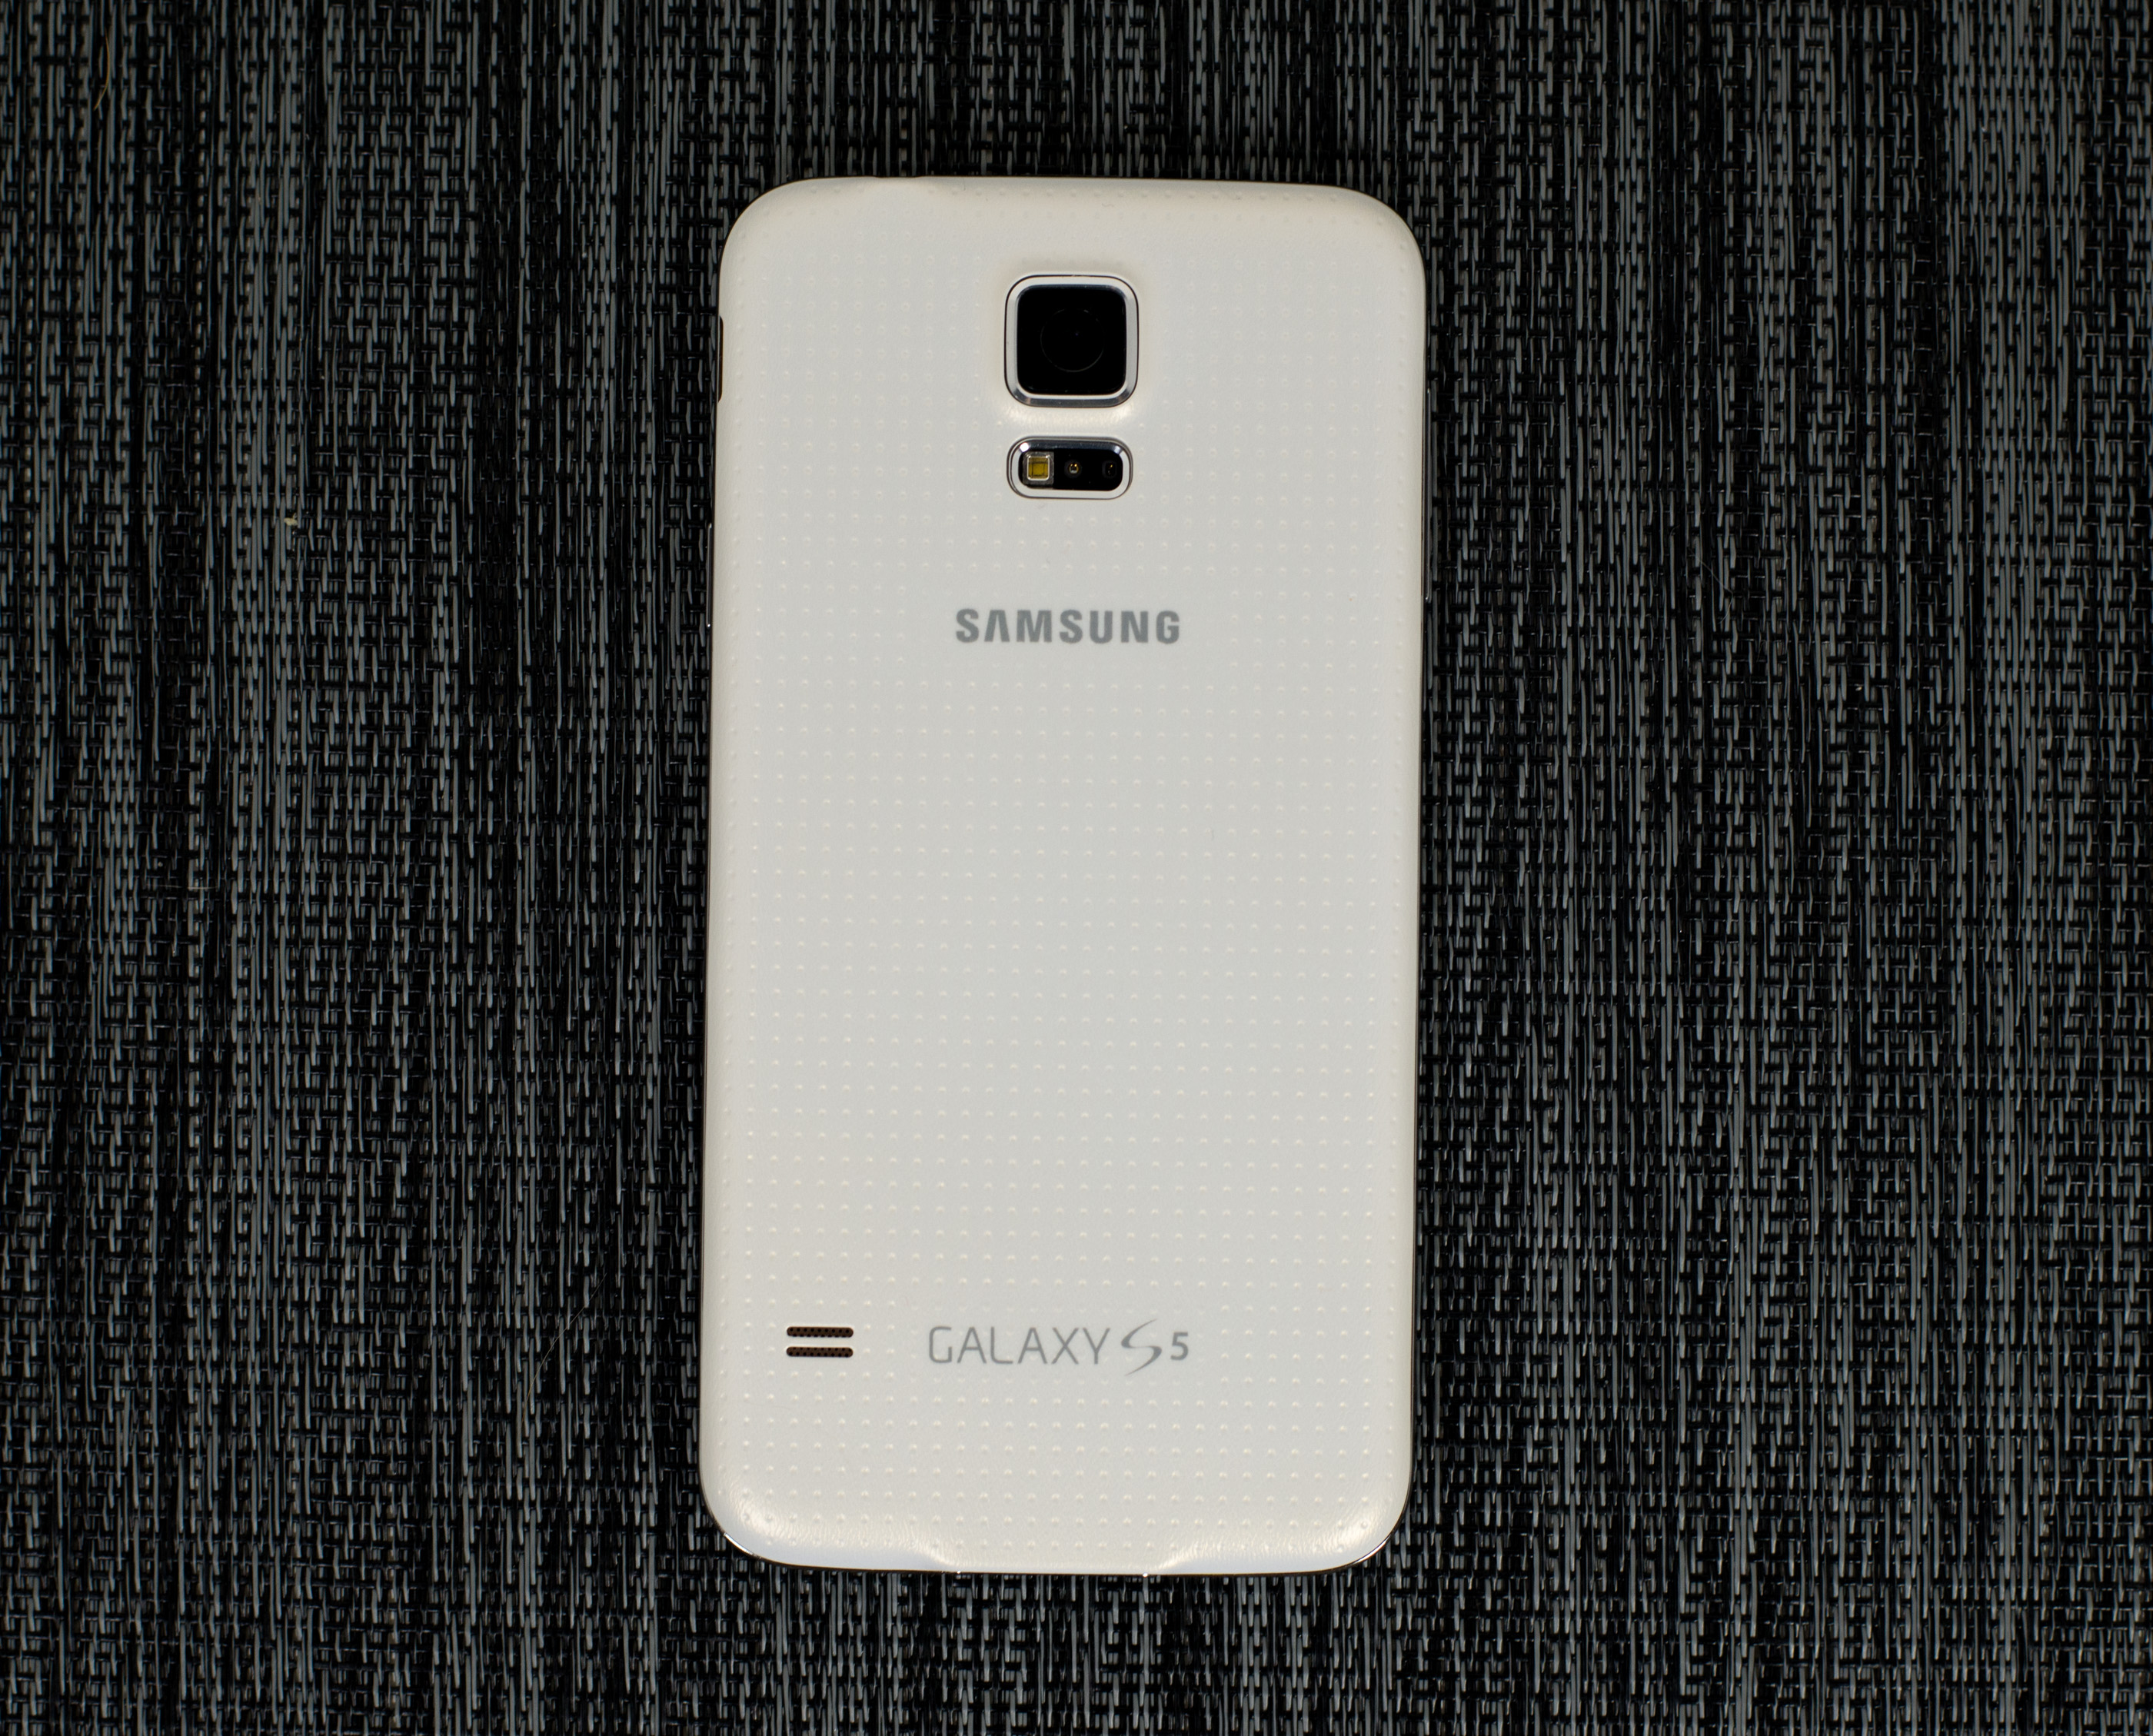 Samsung Galaxy S 5 Review